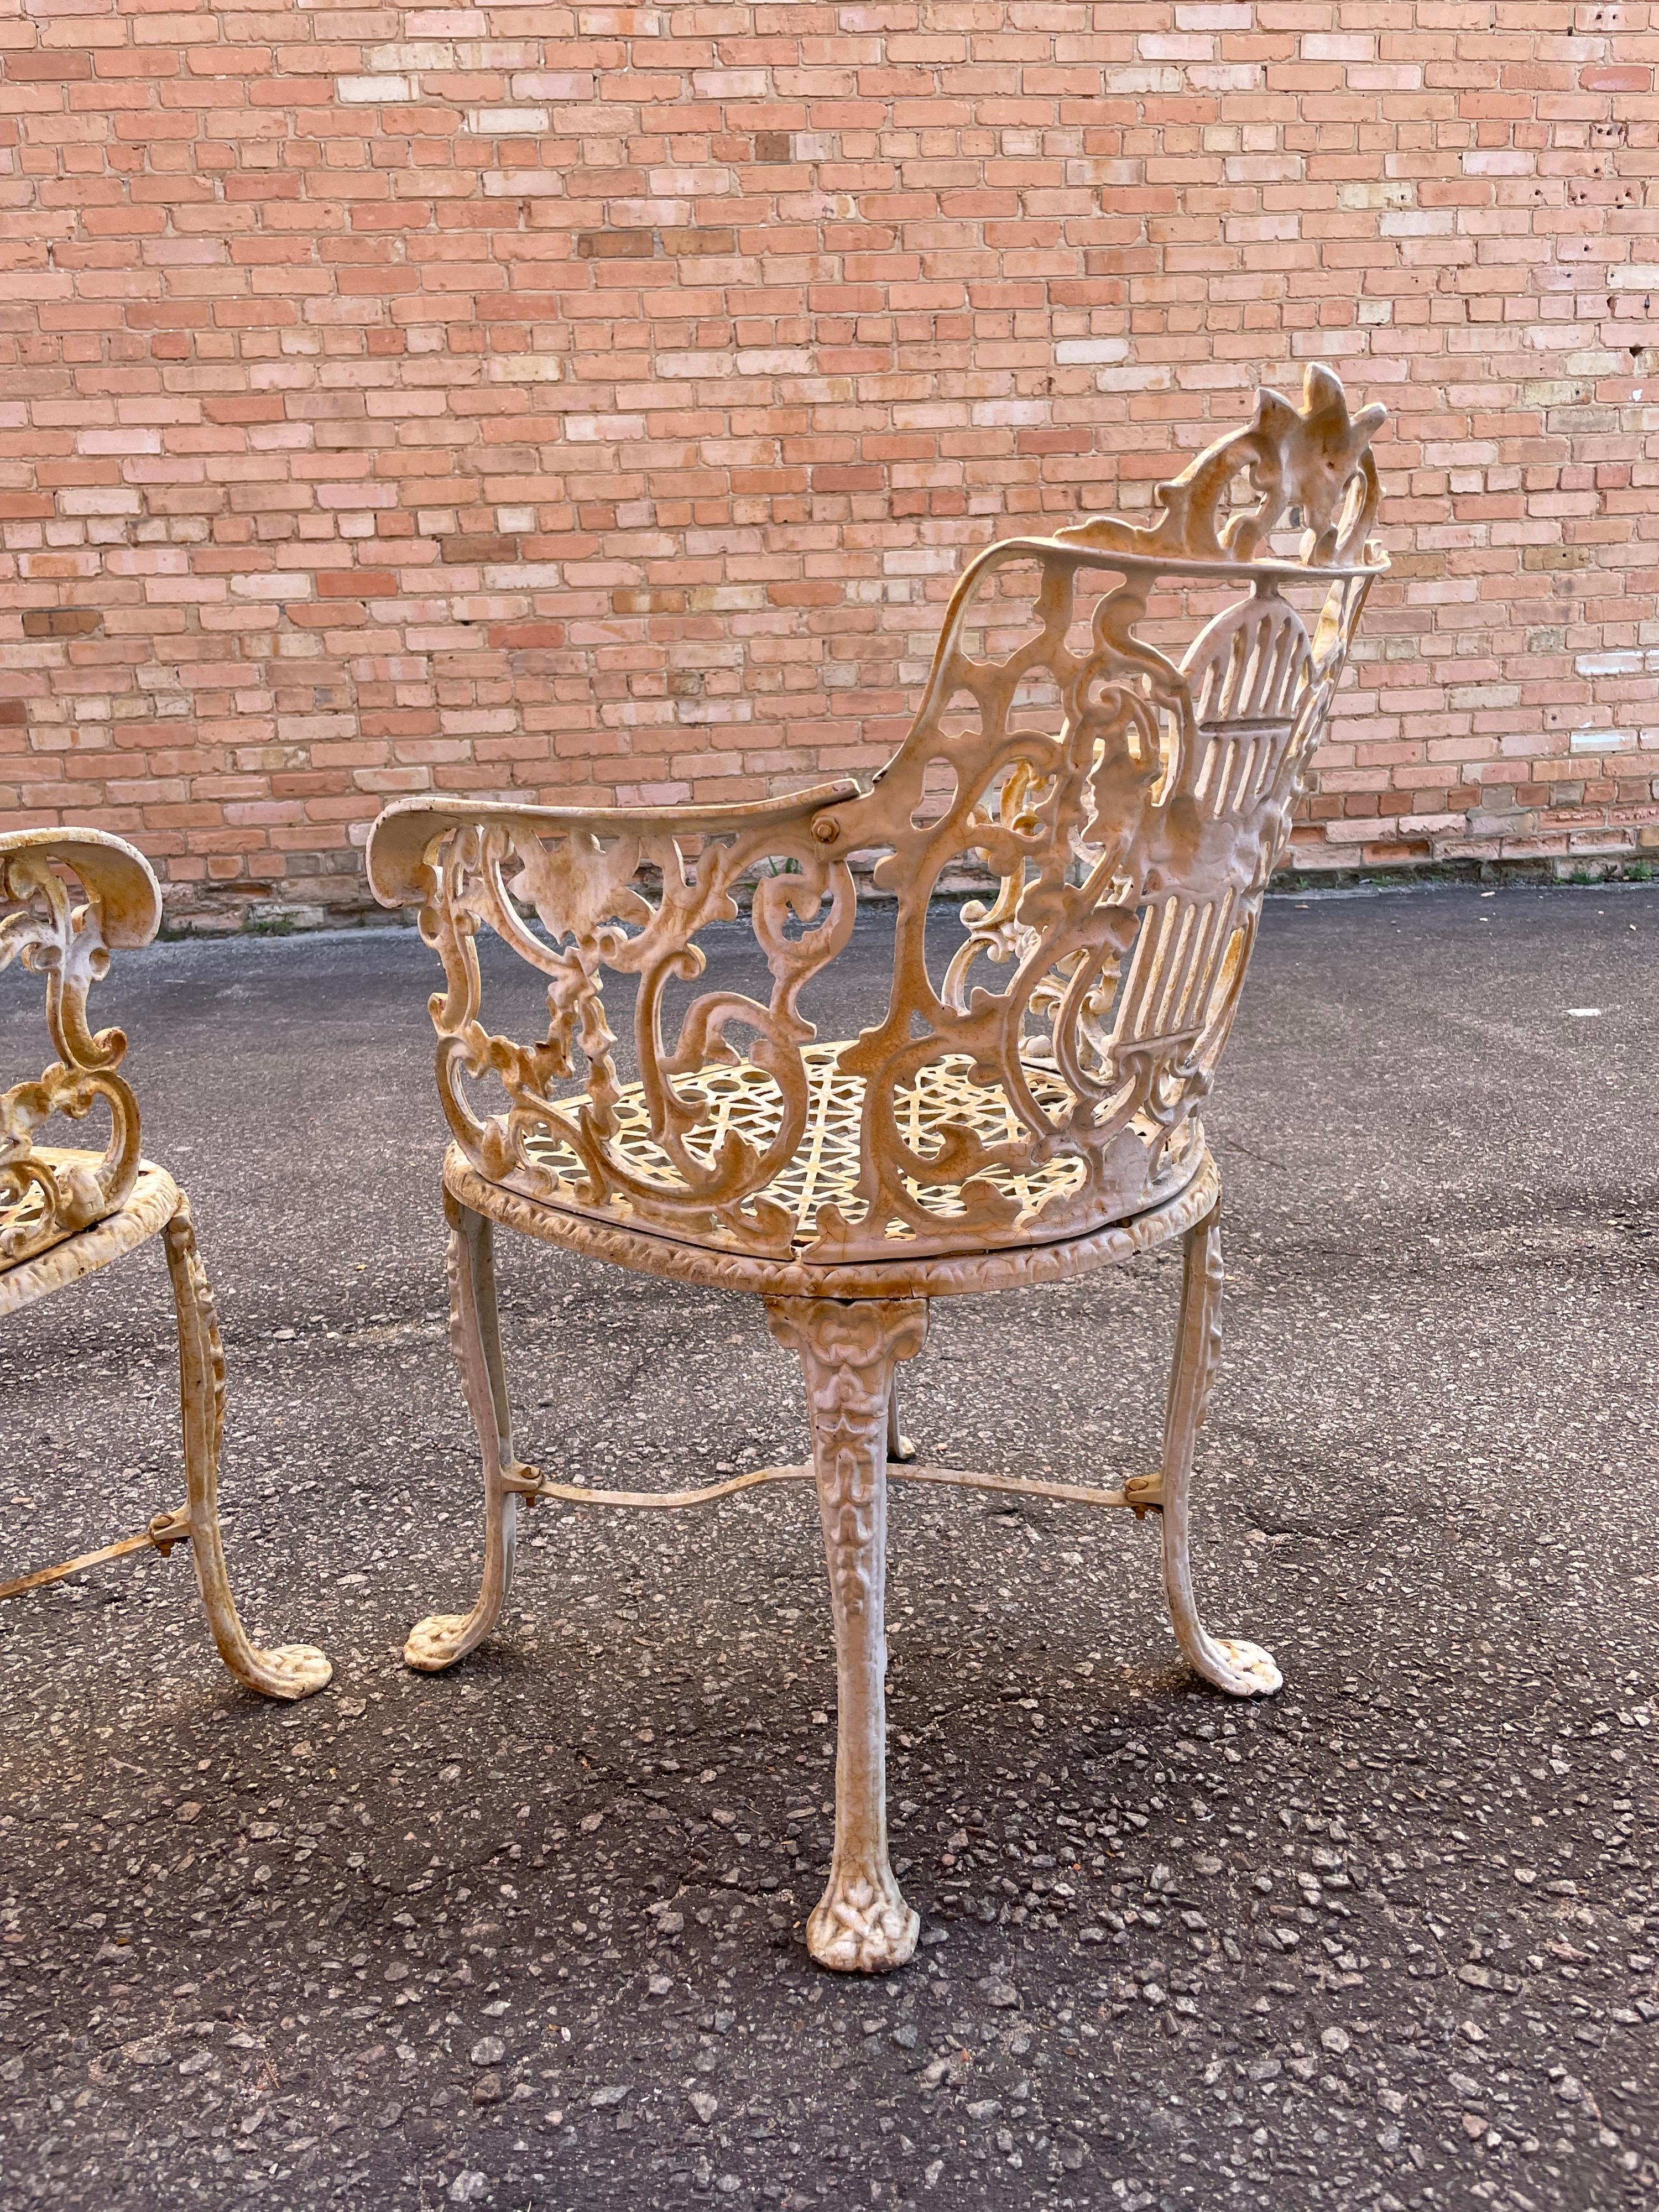 1860s Antique Neoclassical Robert Wood Cast Iron Chairs, a Pair For Sale 6